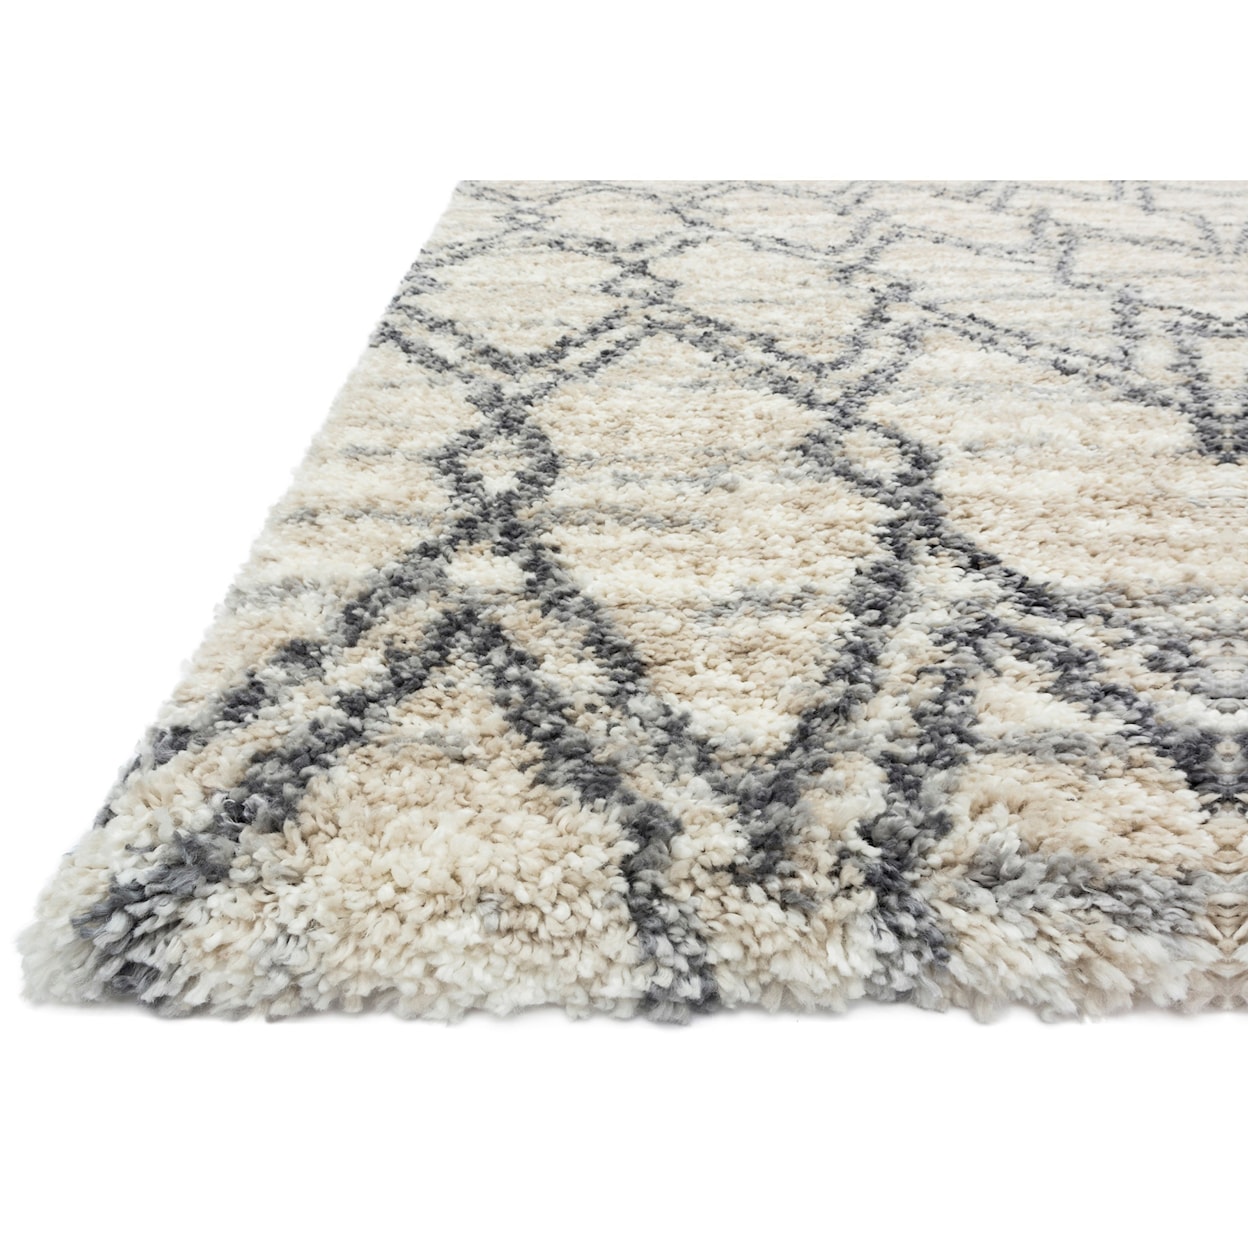 Reeds Rugs Quincy 5'3" x 7'6" Sand / Graphite Rug